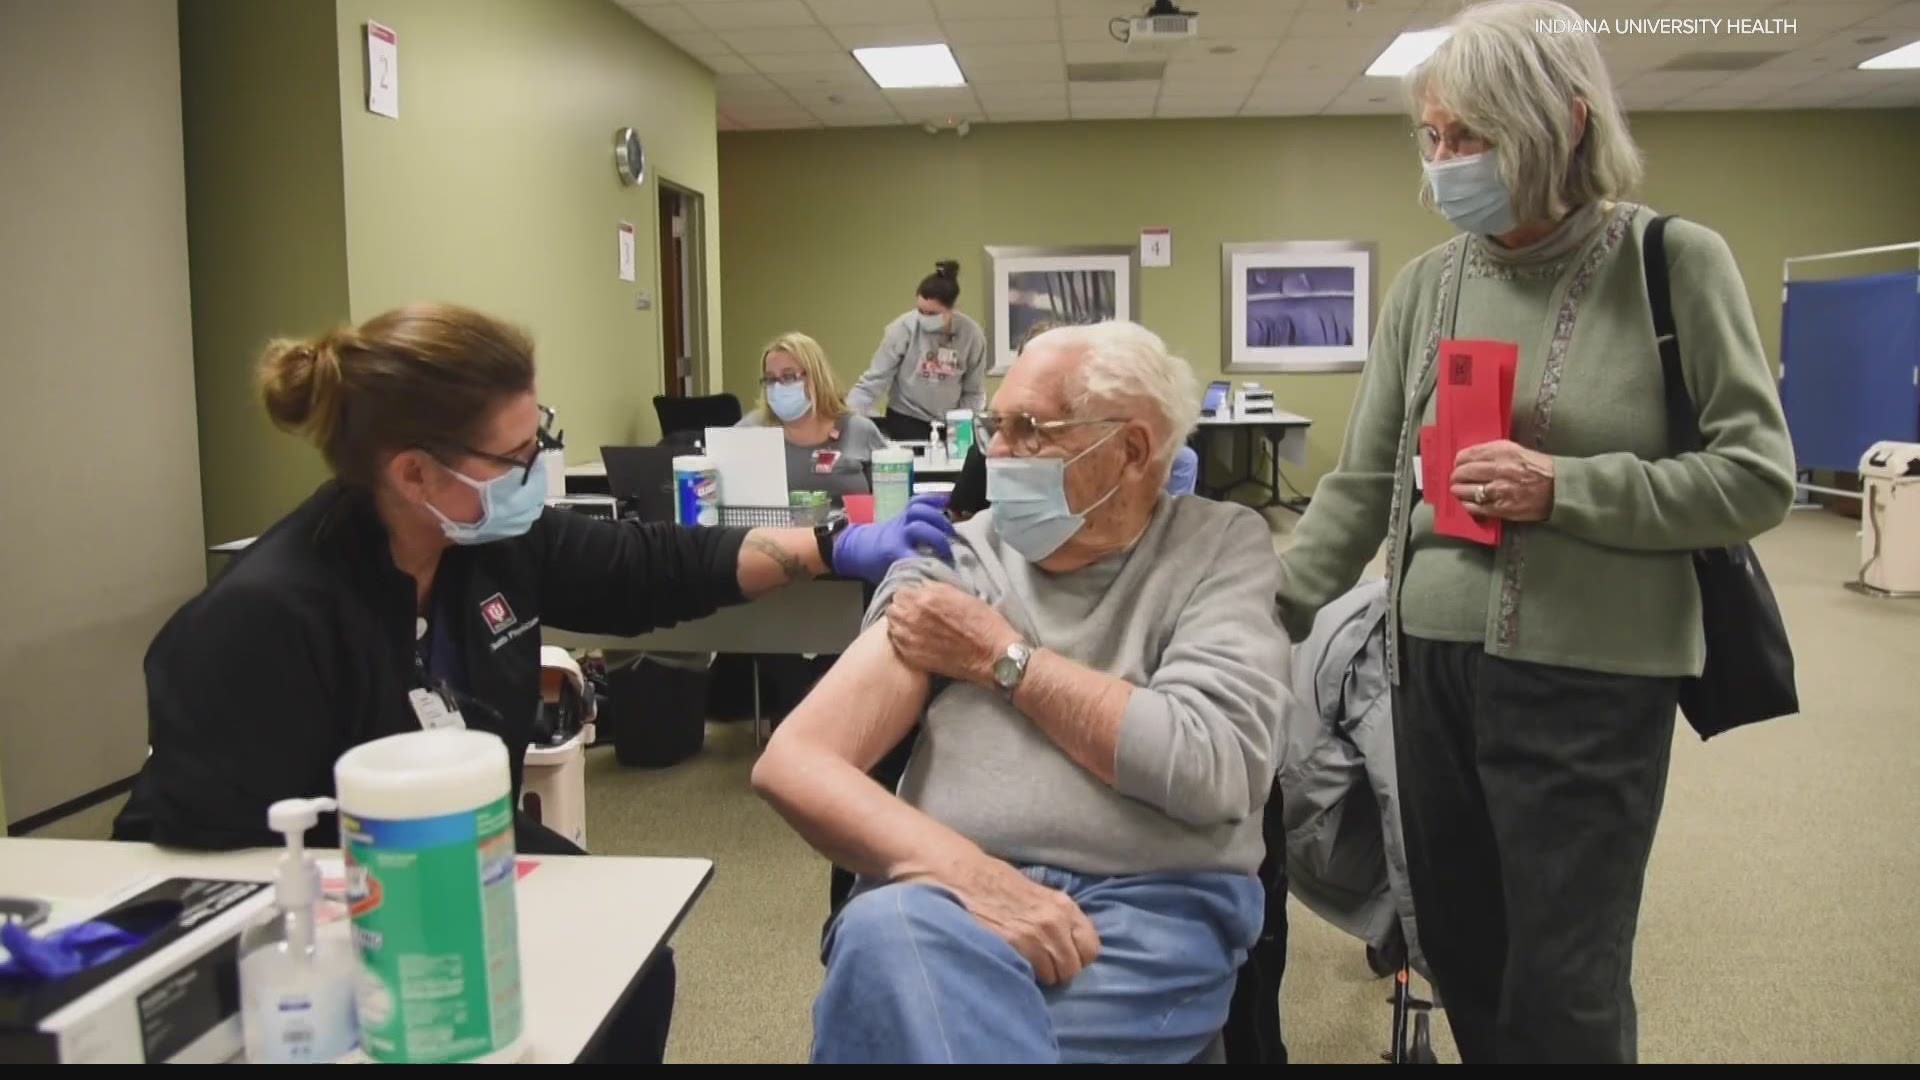 Thousands of people signed up to get vaccinated Friday as Indiana opened vaccinations to those over the age of 80.